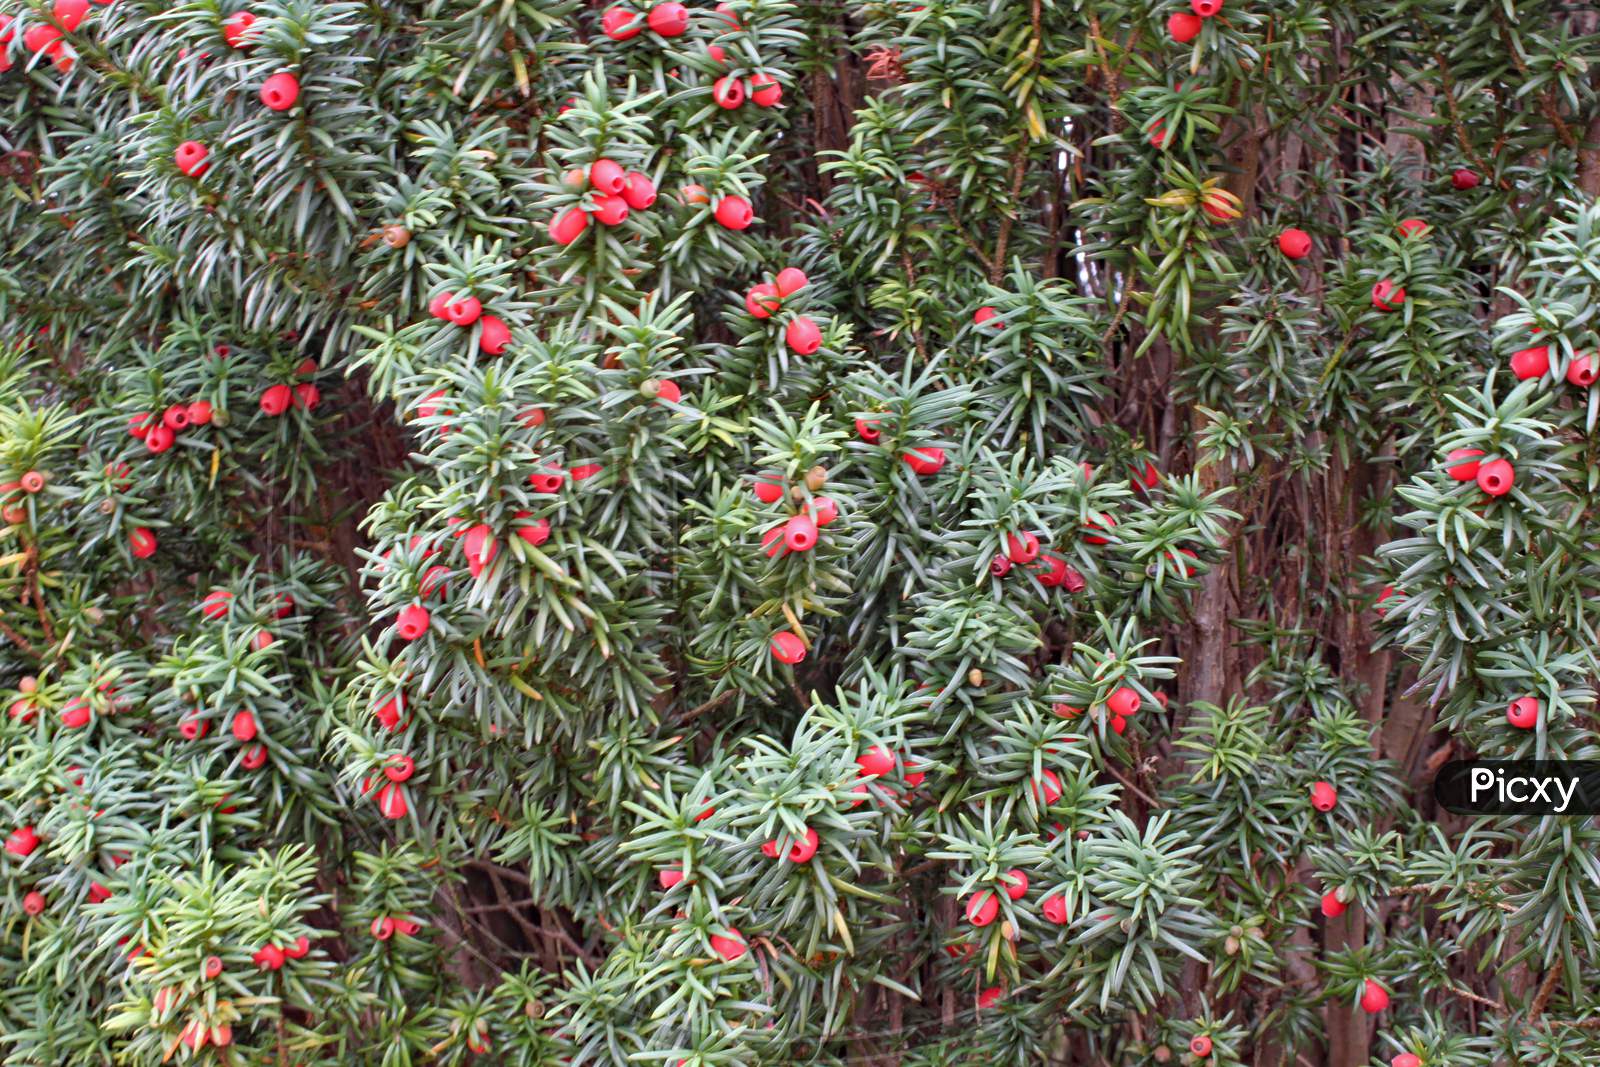 A Mass Of Yew Tree Berries Growing On A Tree